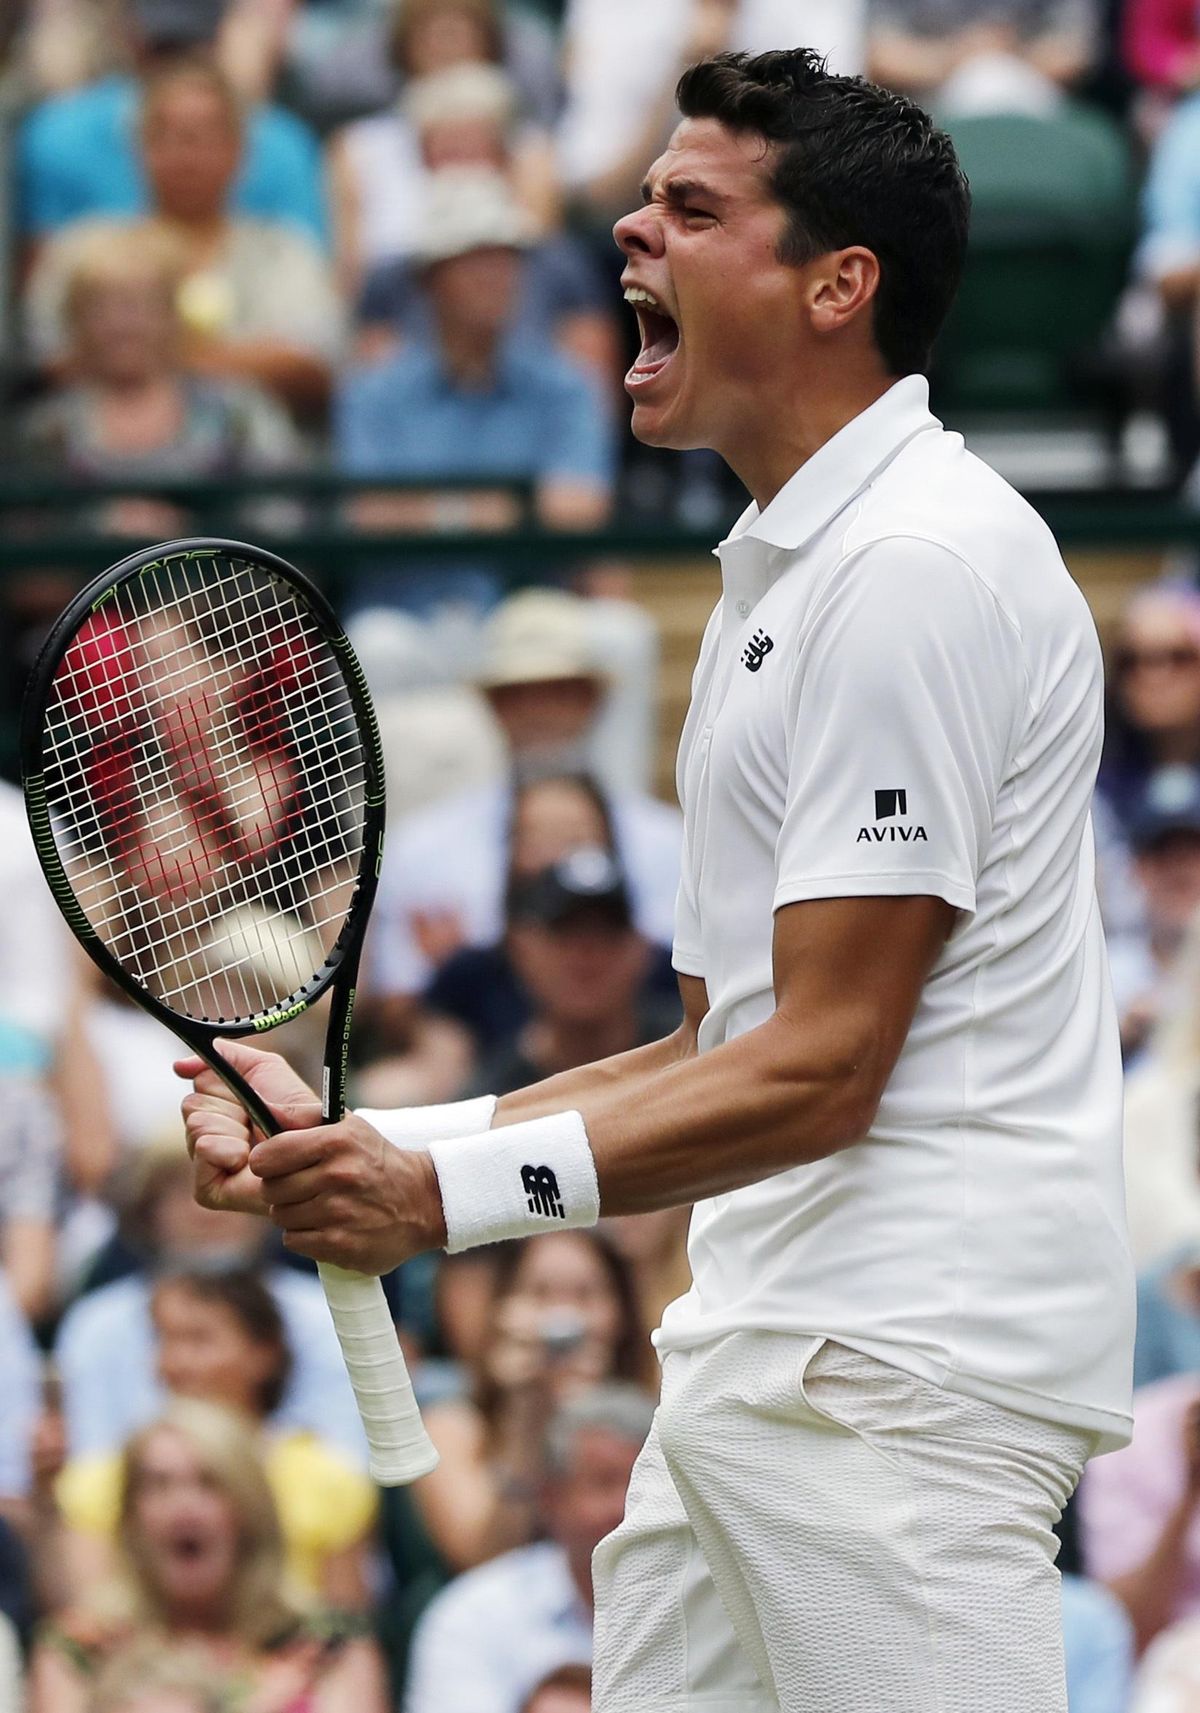 Milos Raonic  celebrates after beating Roger Federer  in their Wimbledon men’s singles semifinal match on Friday. (Ben Curtis / Associated Press)